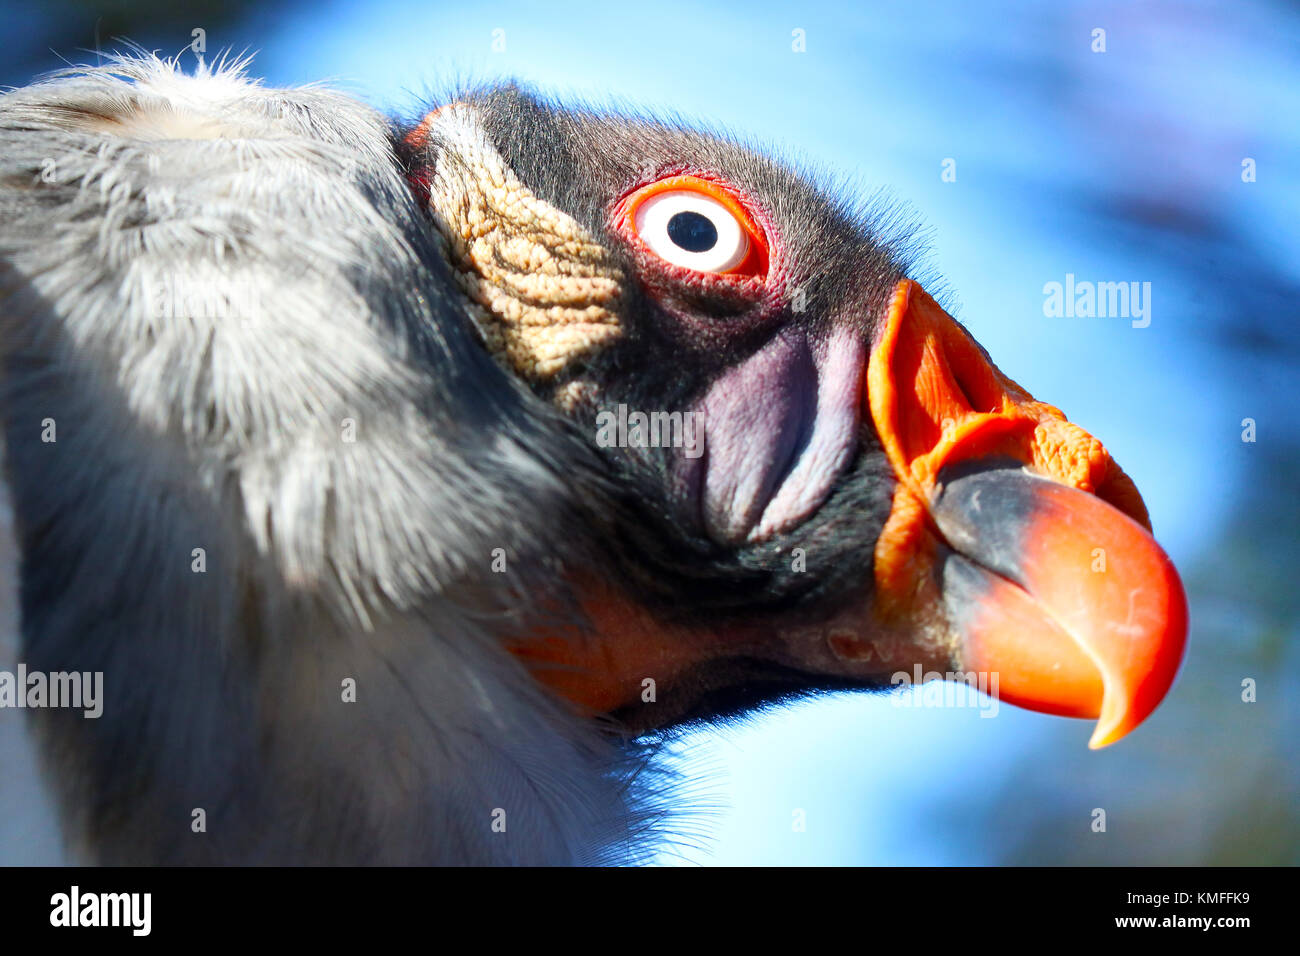 colorful head of a lurking king vulture (sarcoramphus papa) in portrait view in front of a blue sky in the sun Stock Photo